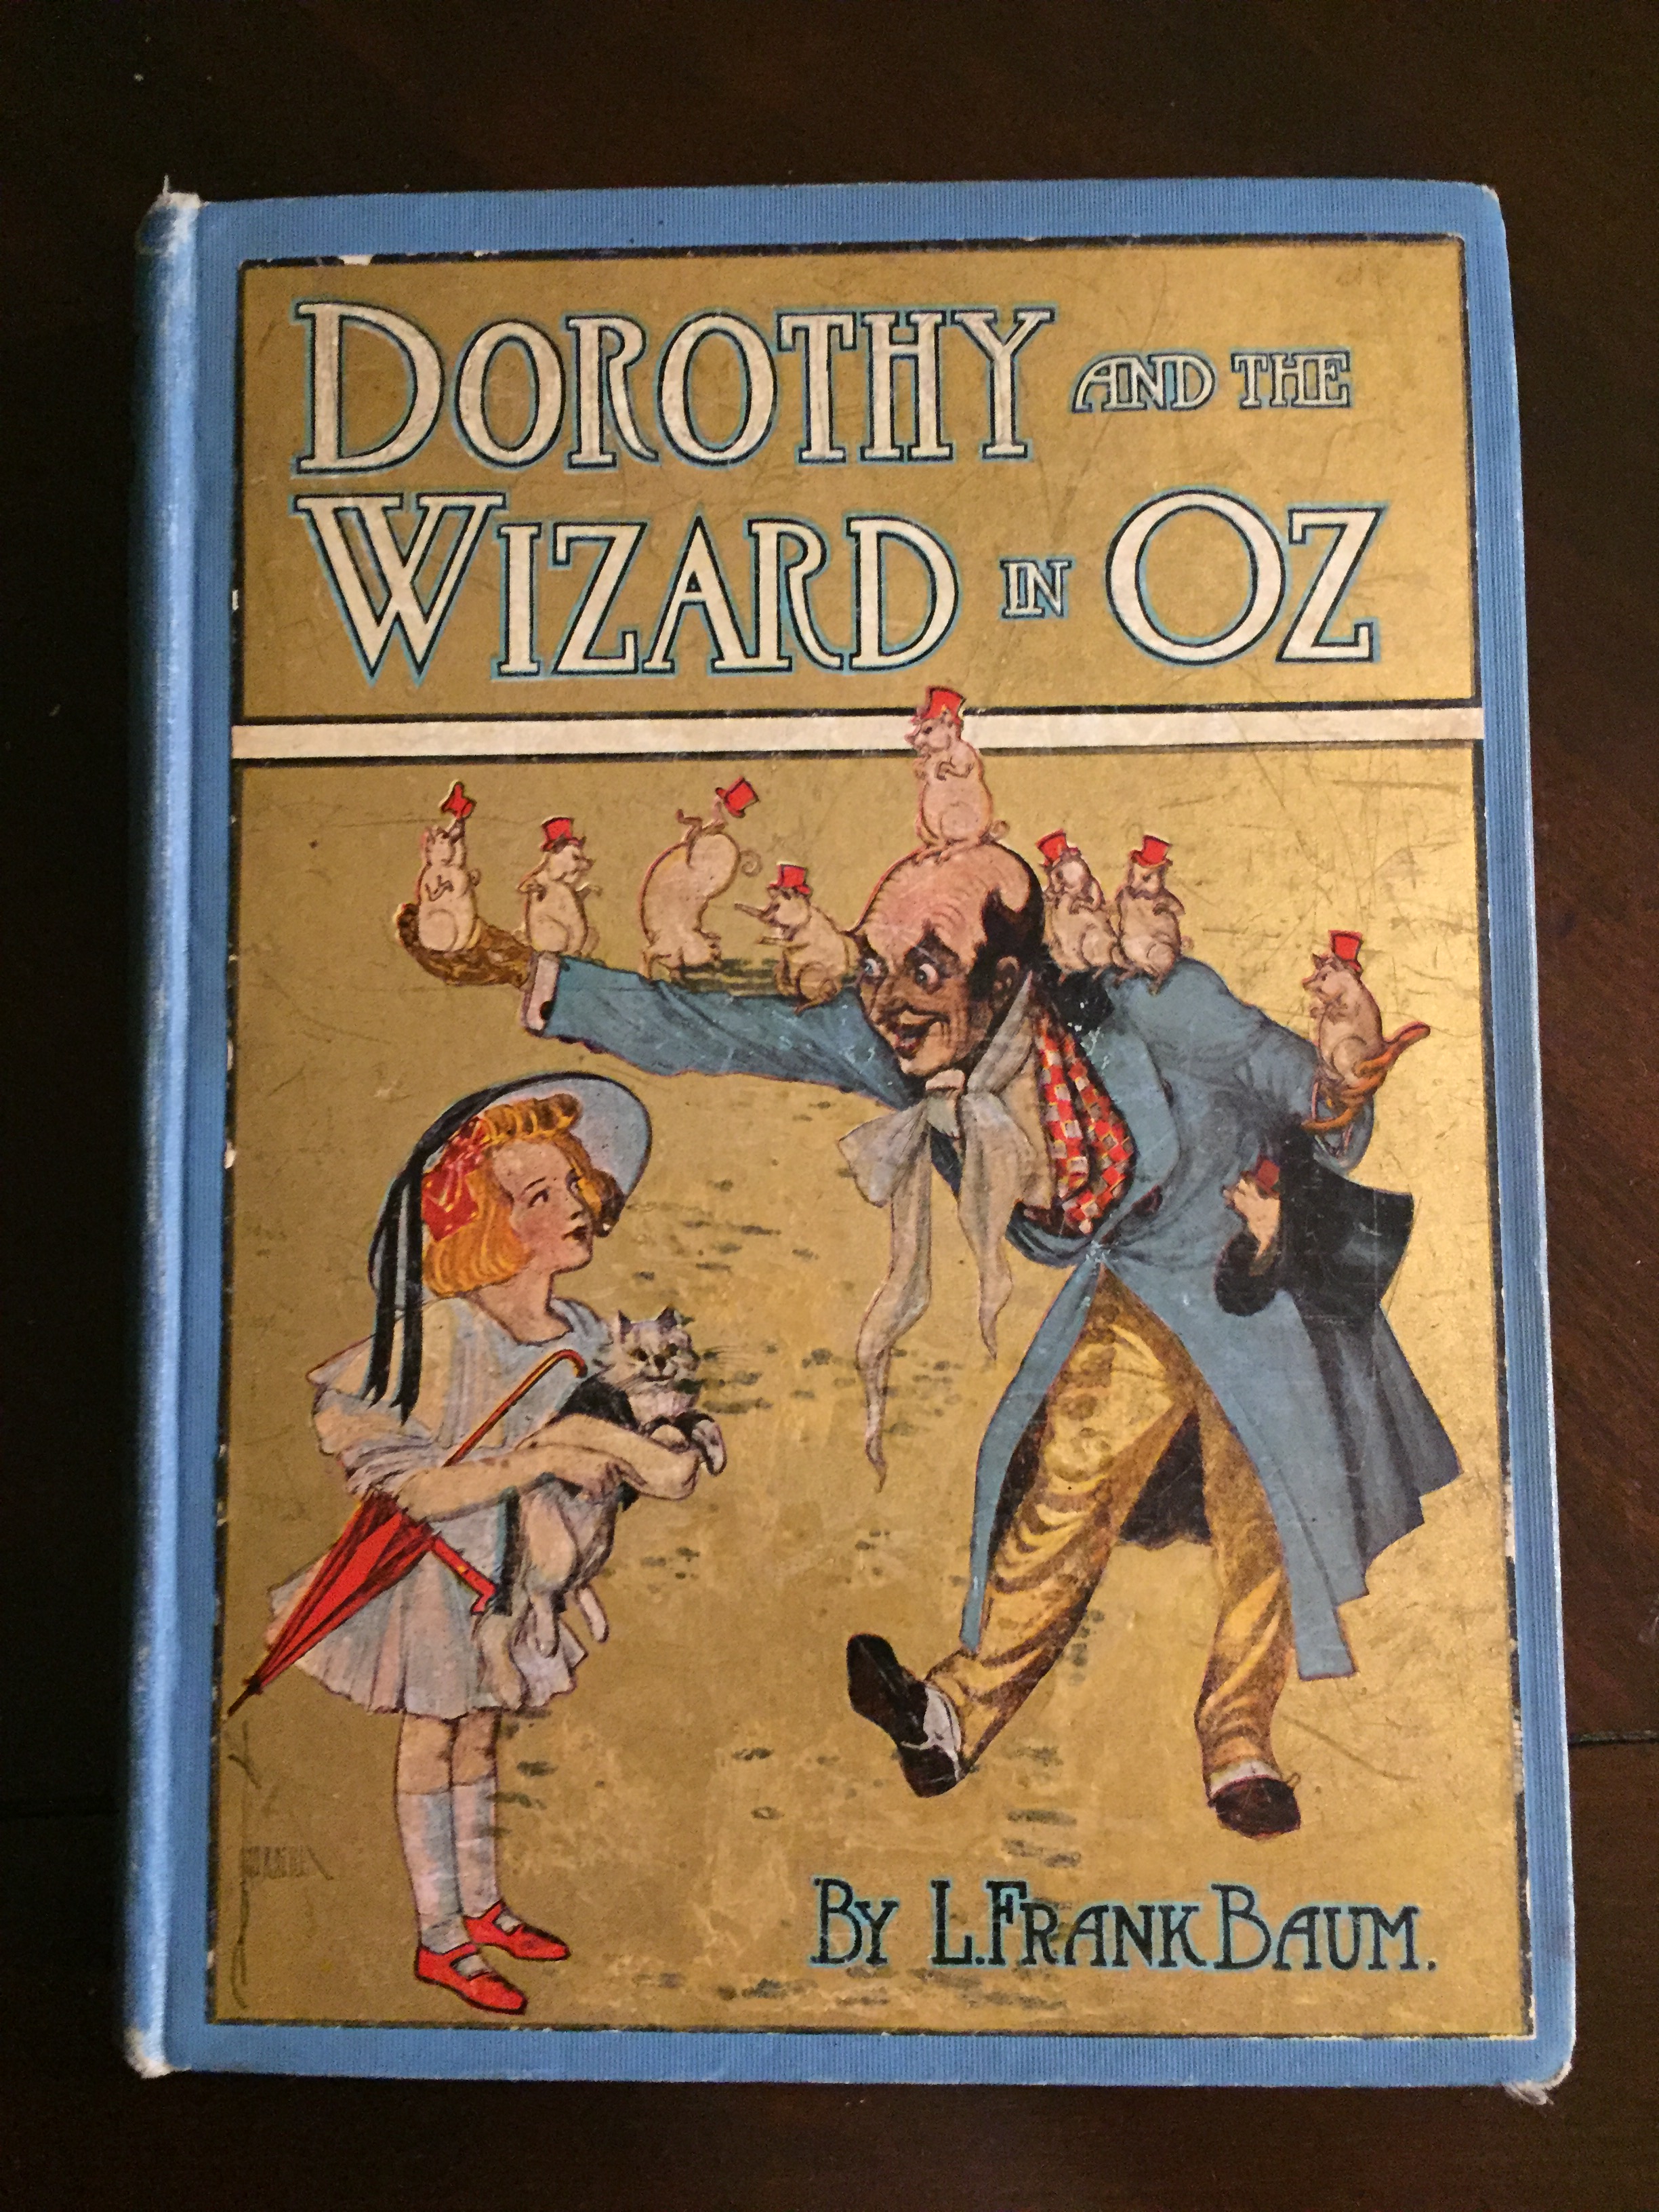 dorothy and the wizard of oz 1908